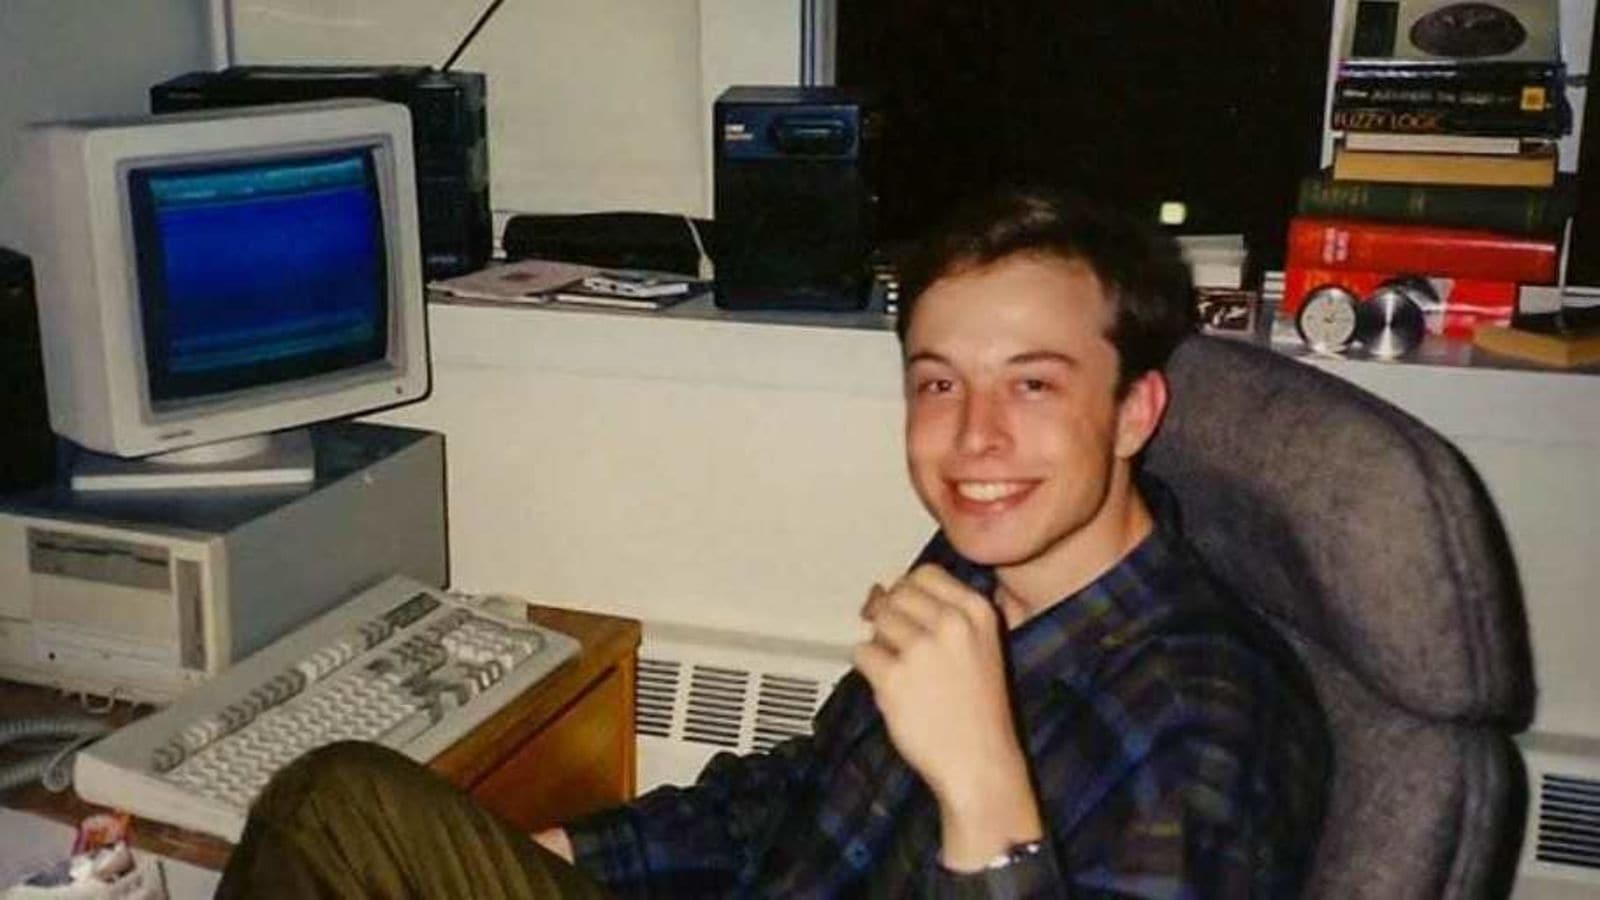 Once Young Elon Musk s Computer Test Scores Were So High He Had To Be Retested HT Auto